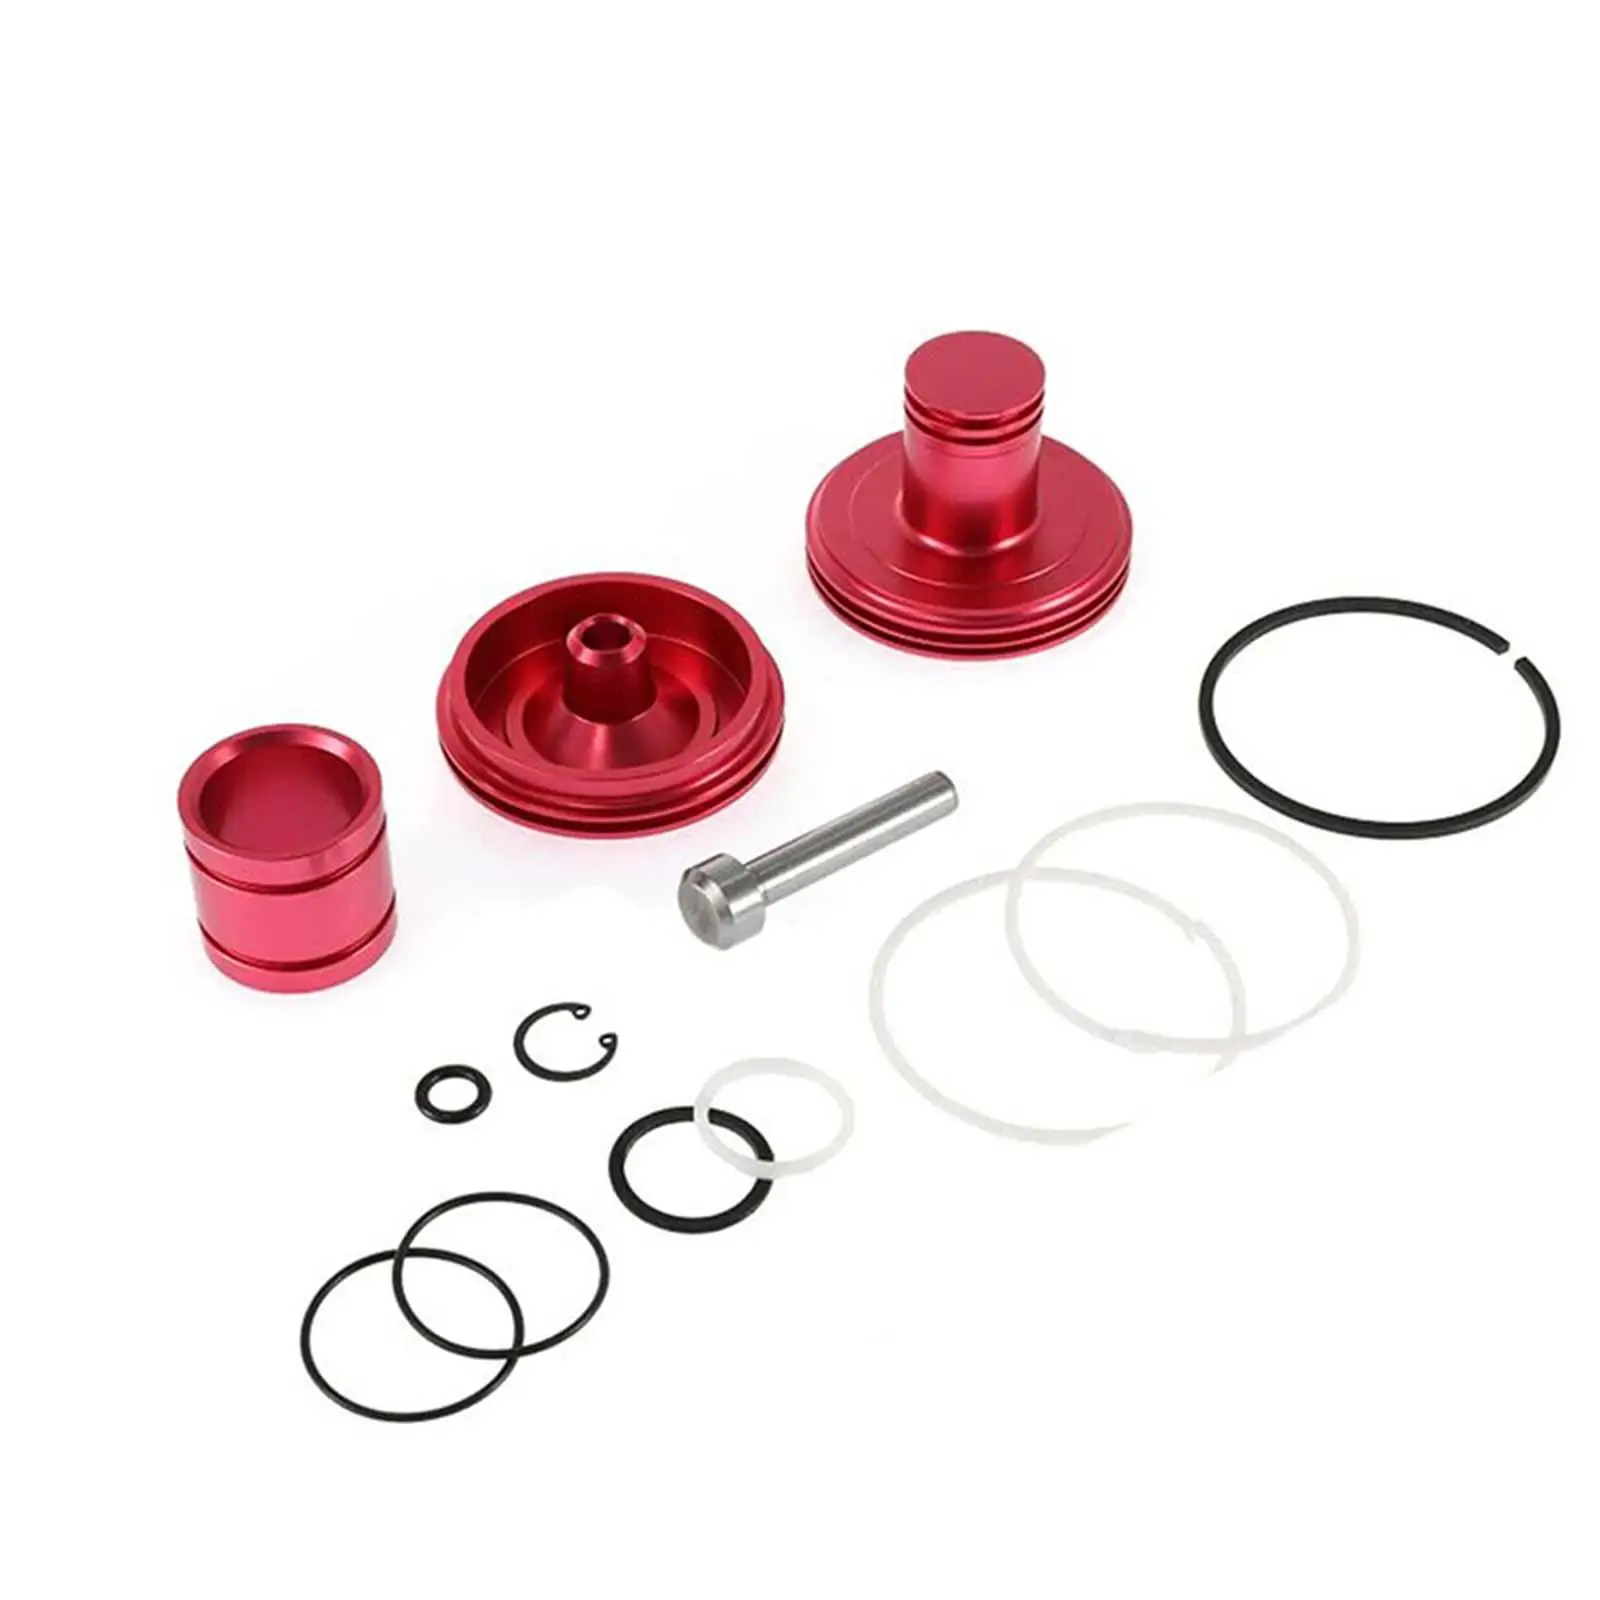 Gear Super Hold Piston Servo Kit 22301B-01K Replacement for A518 A618 A727,